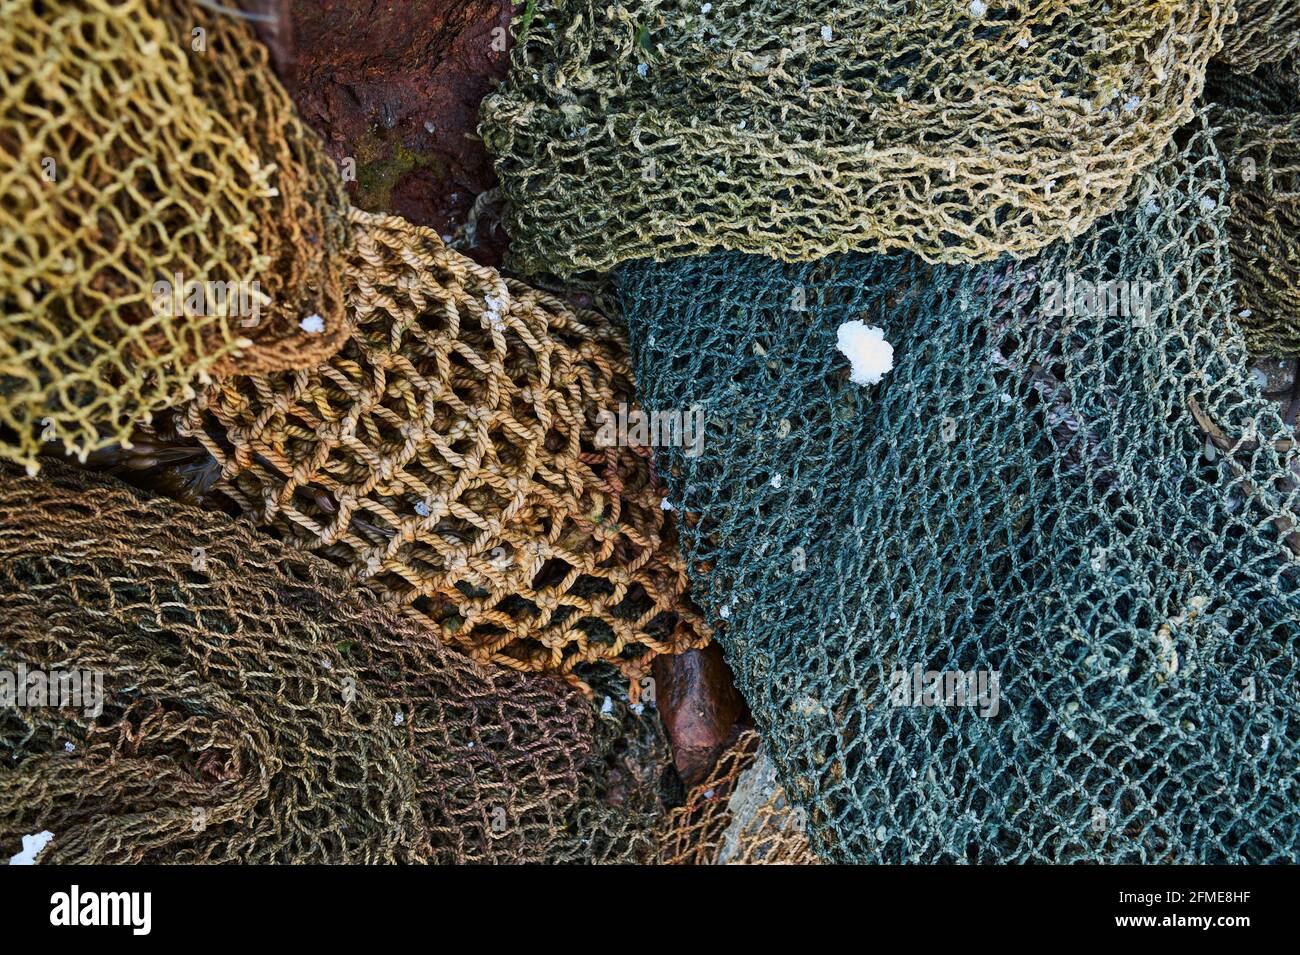 A fishing net is a net used for fishing. Nets are devices made